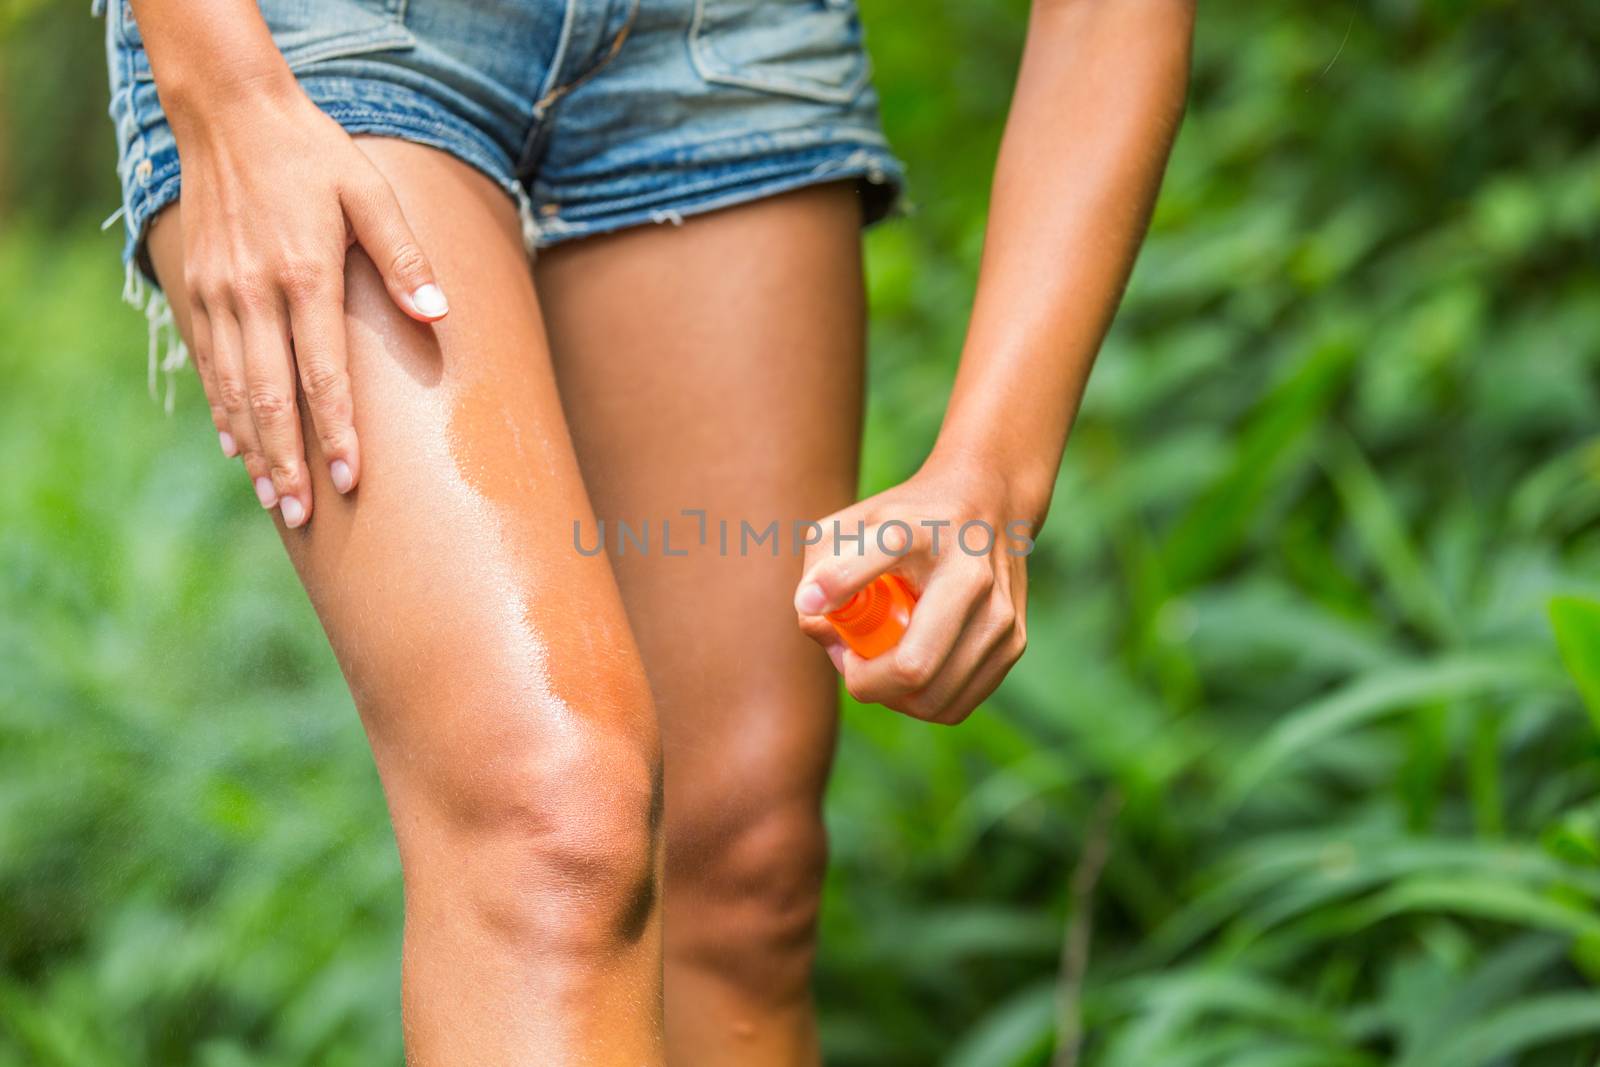 Mosquito repellent spray. Woman spraying insect repellent against zika virus bug bites virus on legs skin outdoor in nature forest using spray bottle.